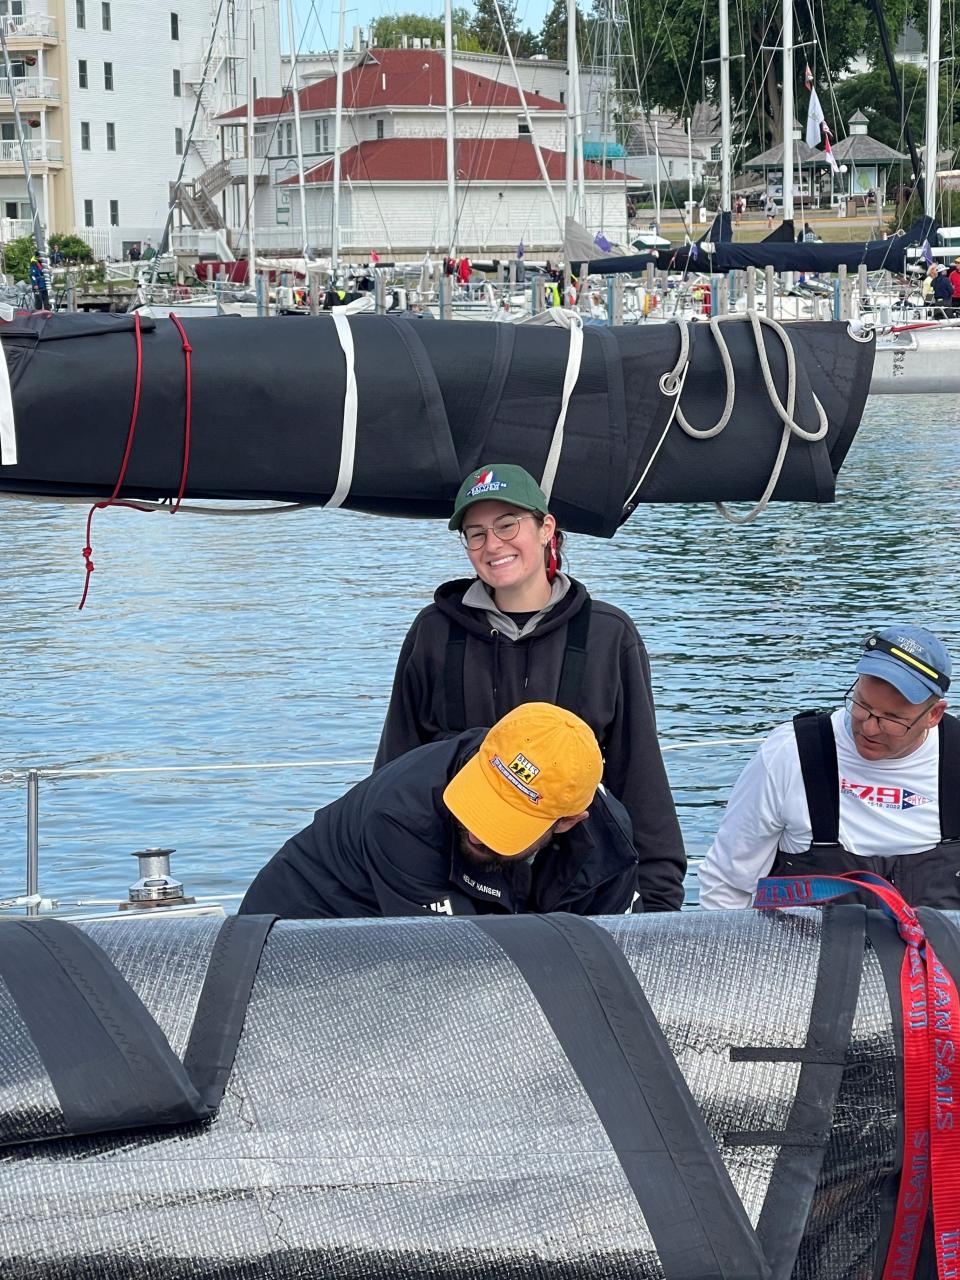 Katie Touma, 19, of Fort Gratiot, is standing on Blue Eyes. Skipper Pat Hoy is on the right, and crewmate Bob Moak Jr., of Sylvan Lake, is in the yellow hat. The boat won second in class and second overall on the Shore Course in the 2023 Bayview Mackinac Race.